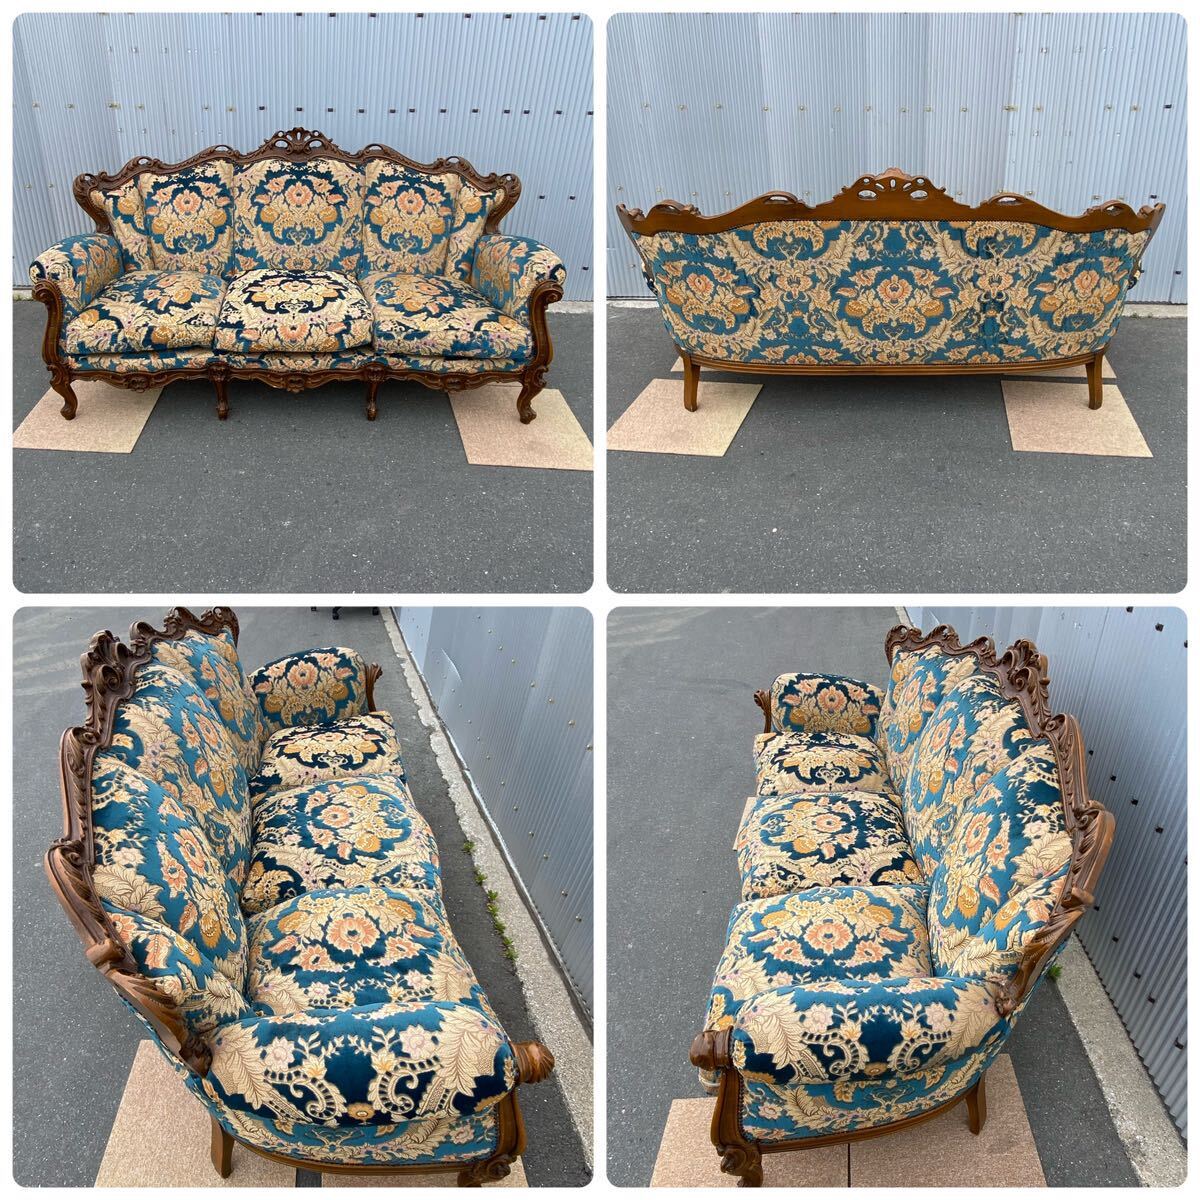 MK#[ direct pickup limitation / Aichi prefecture Toyohashi city ]ro here style feathers sofa 3 point set tree carving cat legs living customer interval reception Europe antique chair furniture 